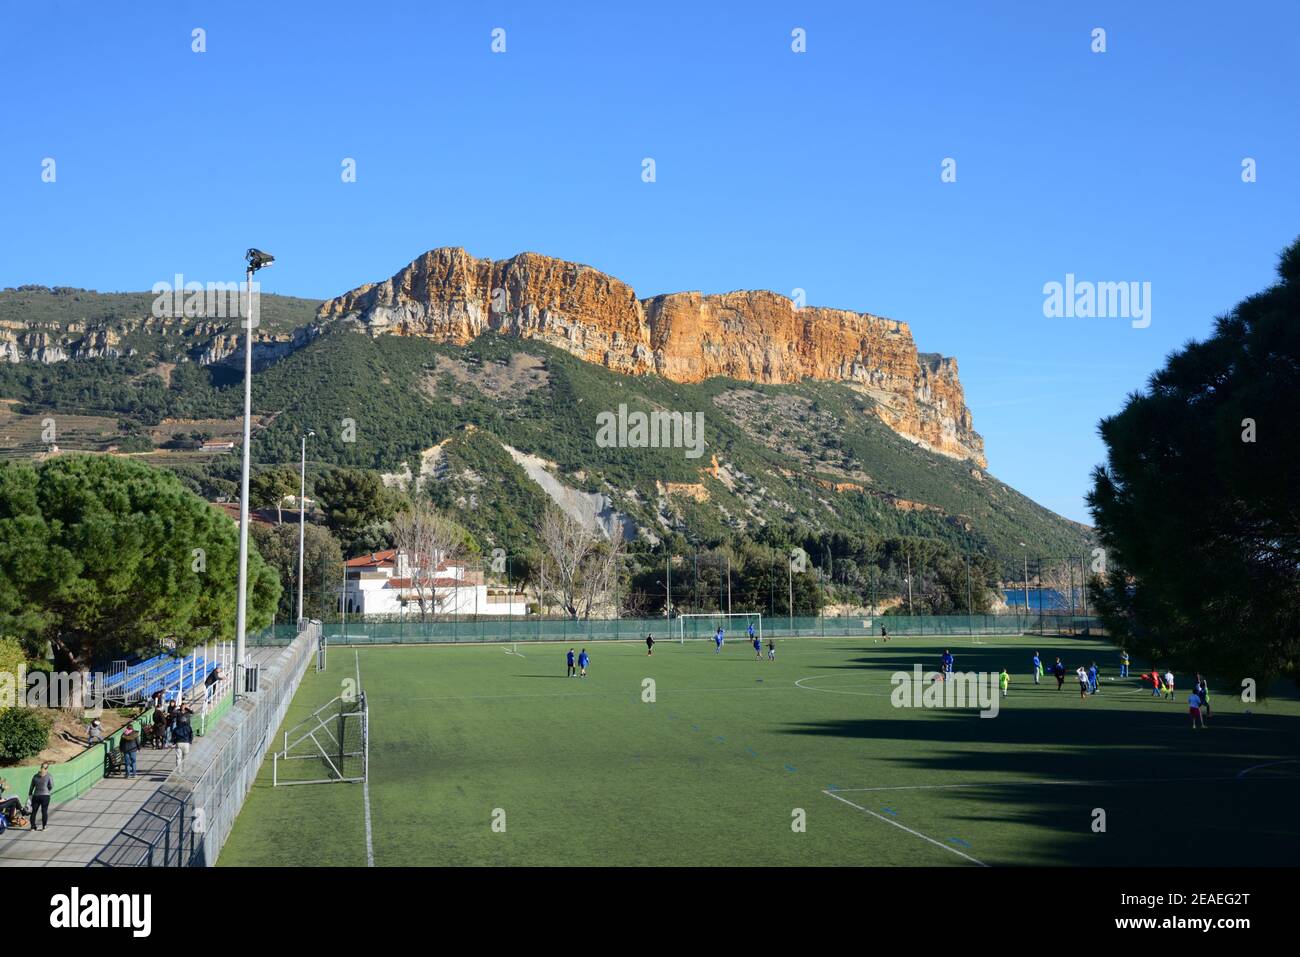 Cap Canaille Peninsula, Sea Cliffs & Beautifully-Sited Football Pitch or Soccer Field on Mediterranean Coast Cassis Bouches-des-Rhône Provence France Stock Photo